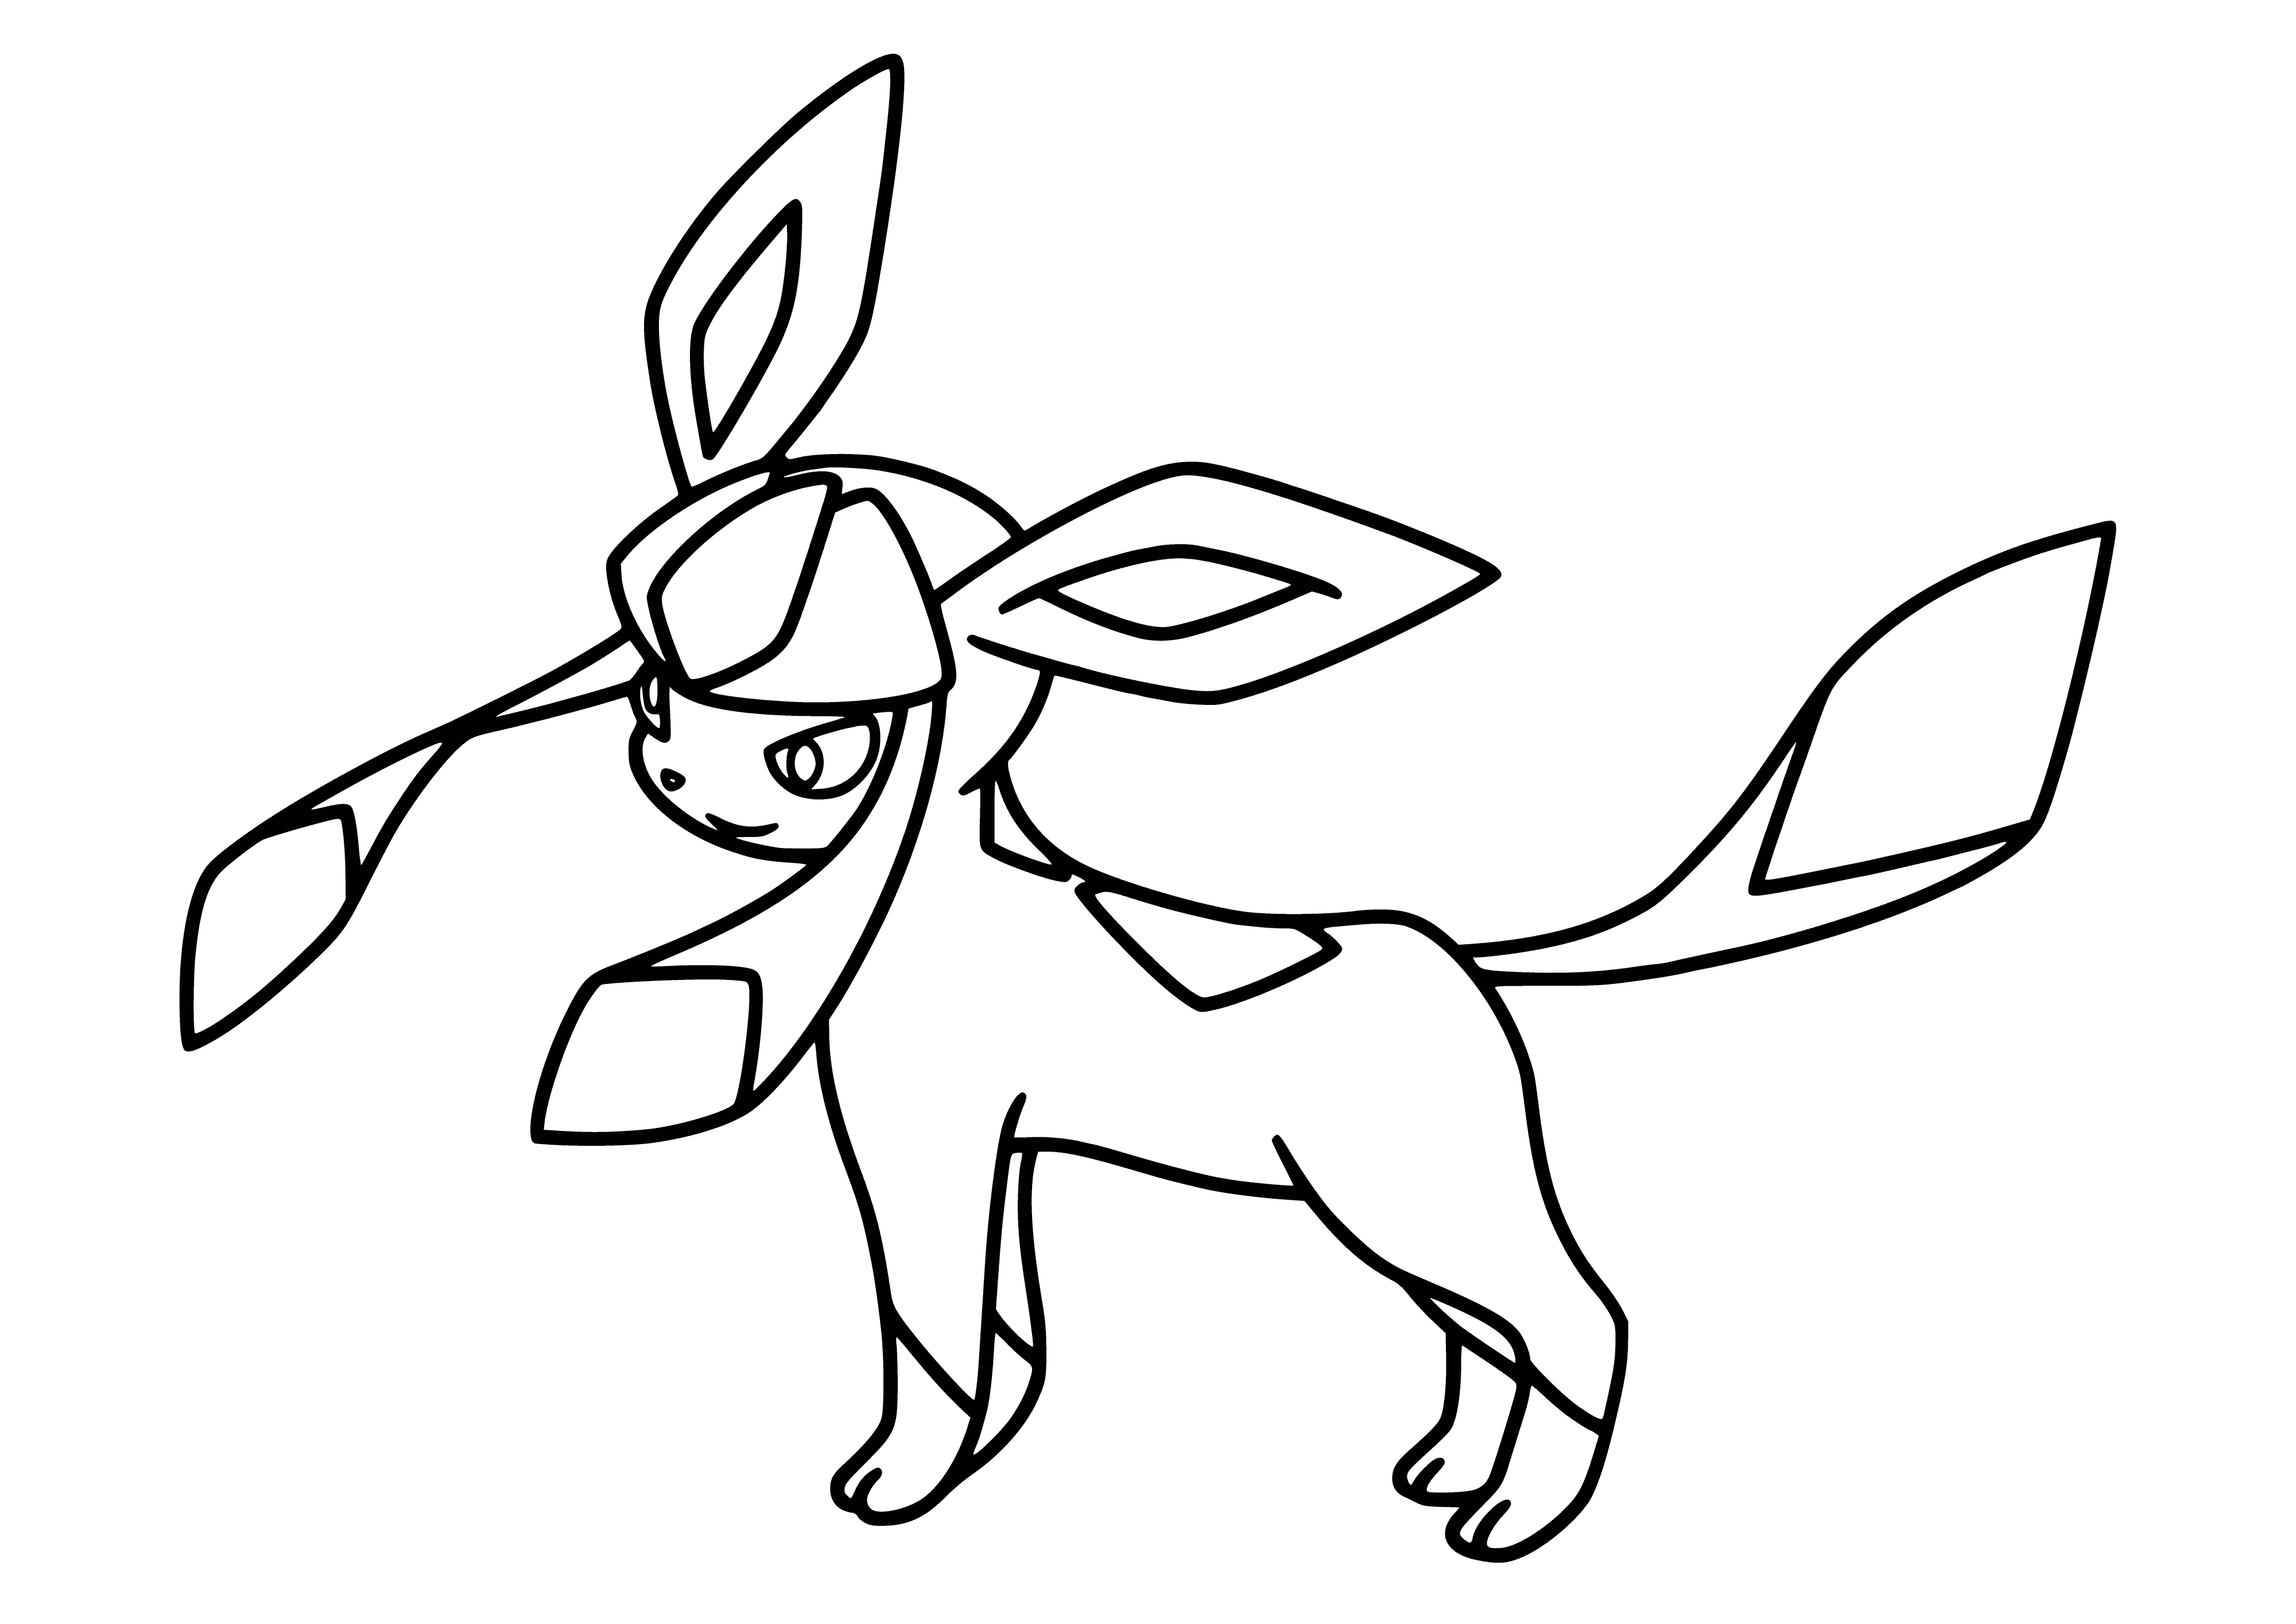 coloring page: Small foxy-looking Pokemon, light blue fur. Has 2 tails w/blue tips, light blue ruff+backstrip, round head, pointed ears, black nose & 3-toed light-blue paw pads.